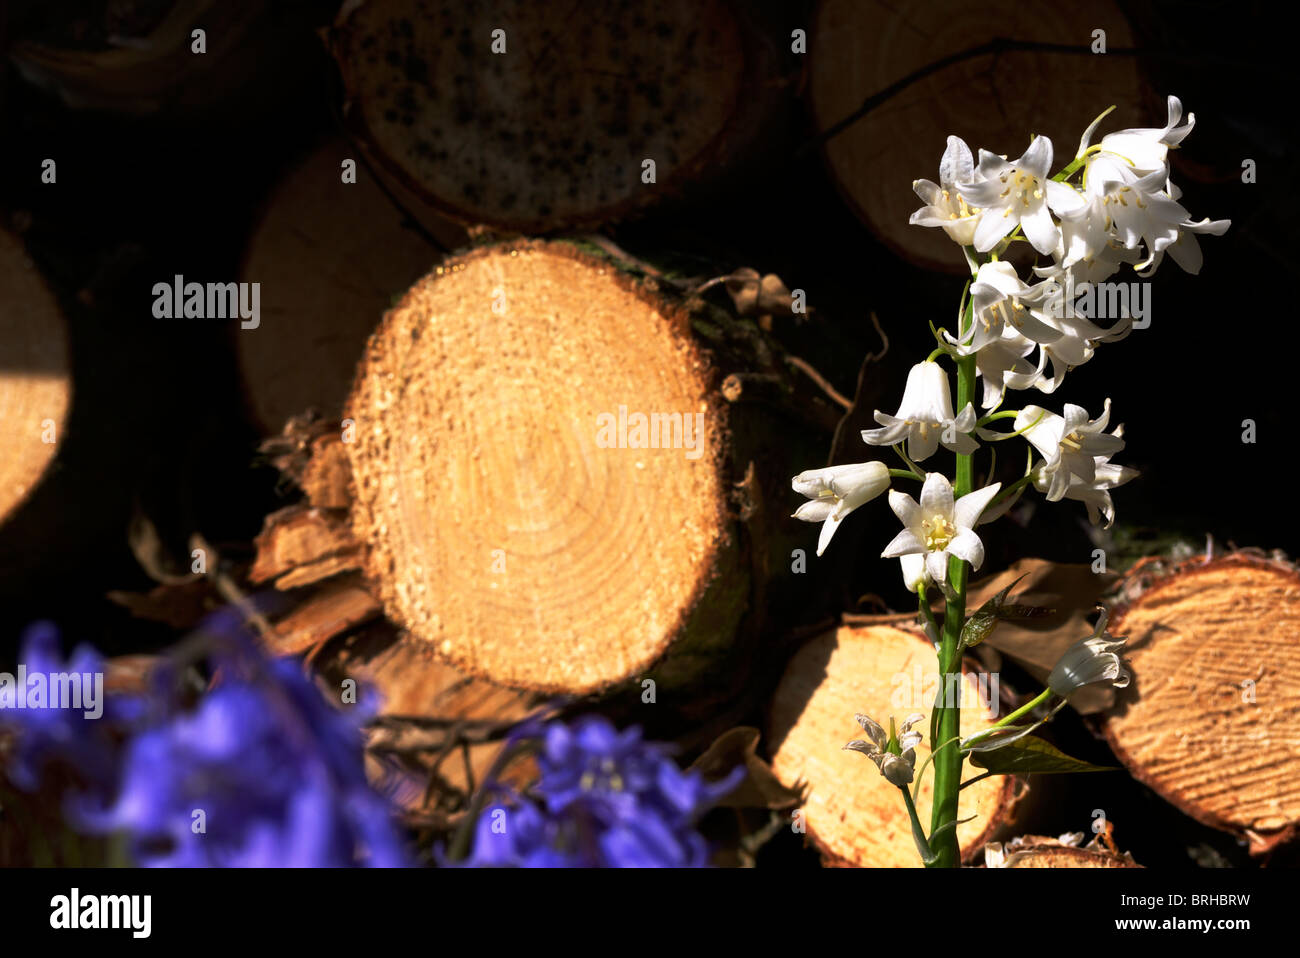 White and blue Bells in front of a wood pile Stock Photo